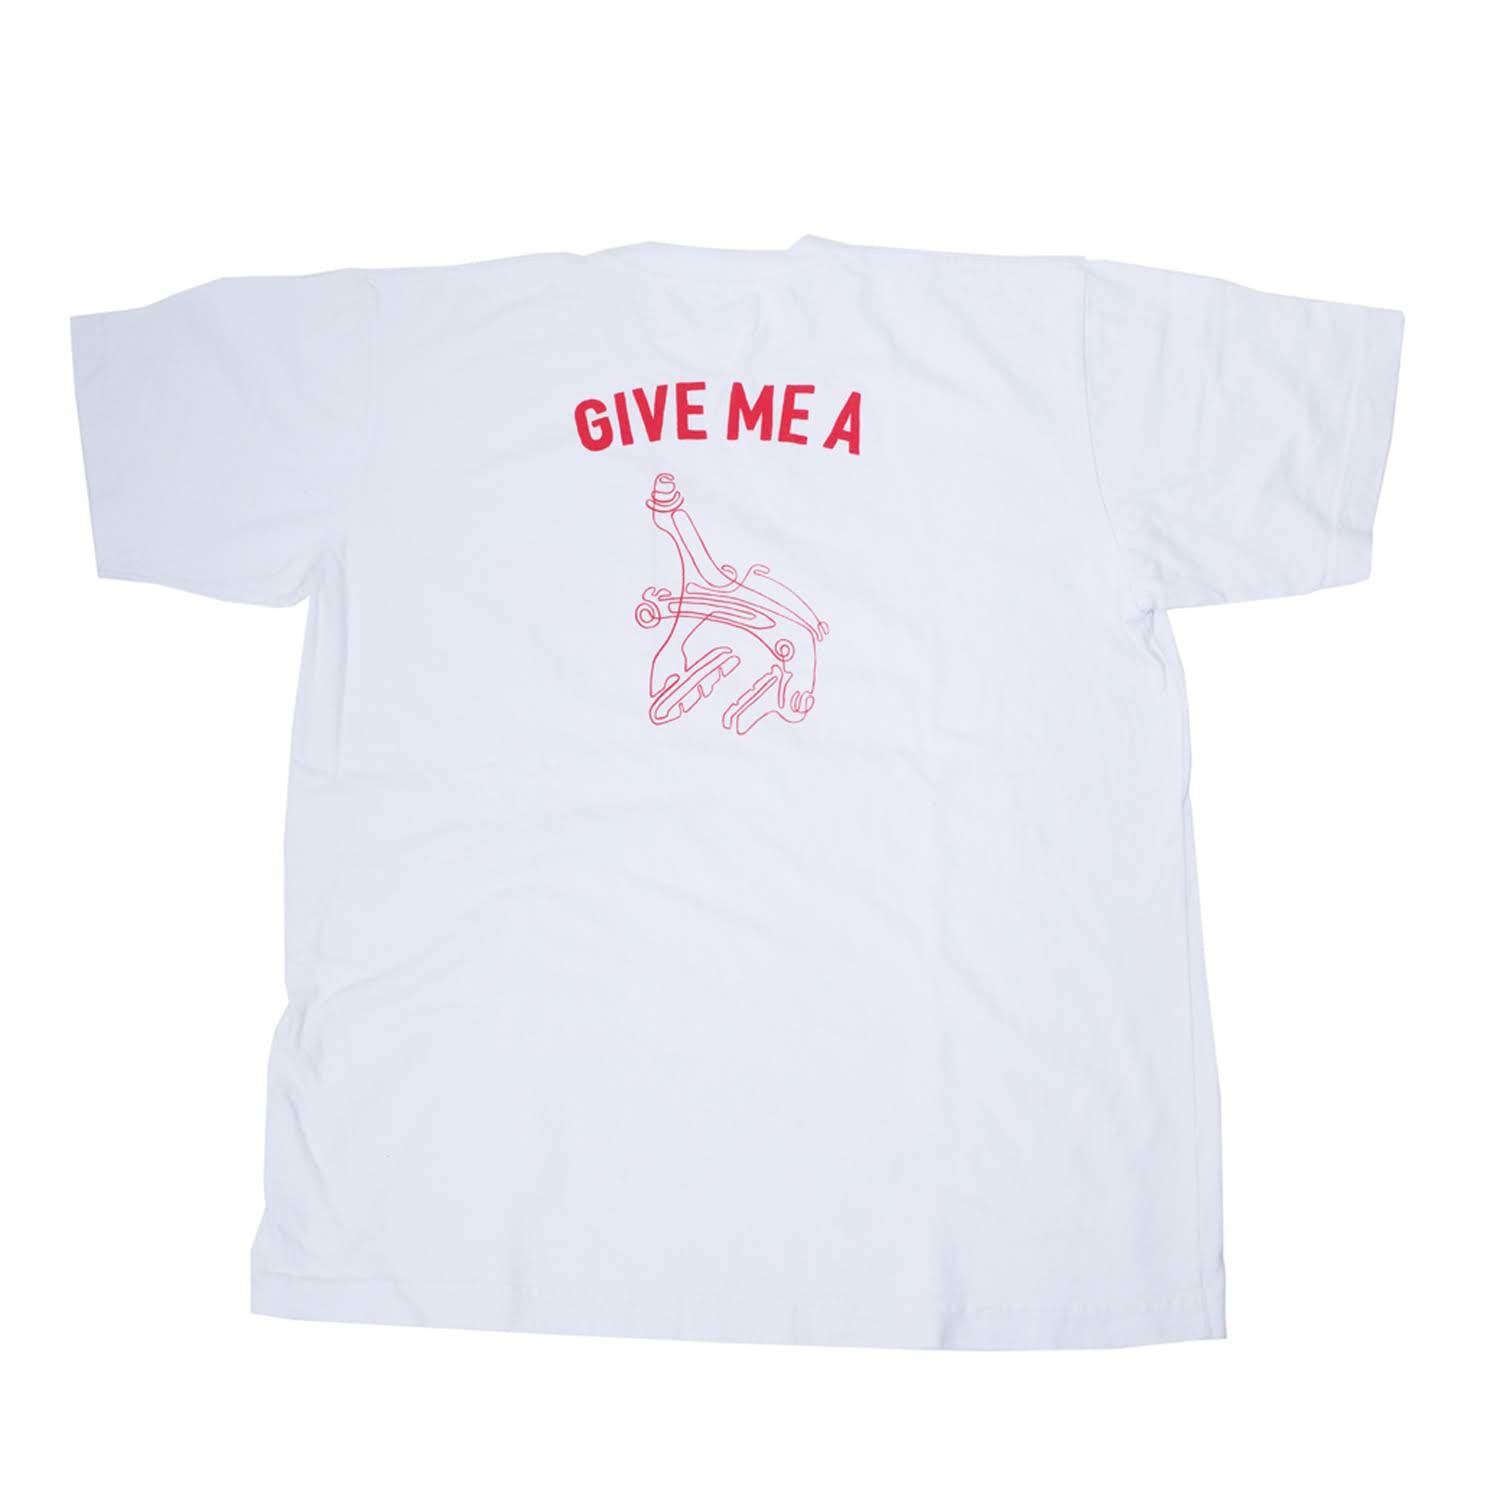 GOLDEN SADDLE CYCLERY Give Me A "Brake" Pocket Tee